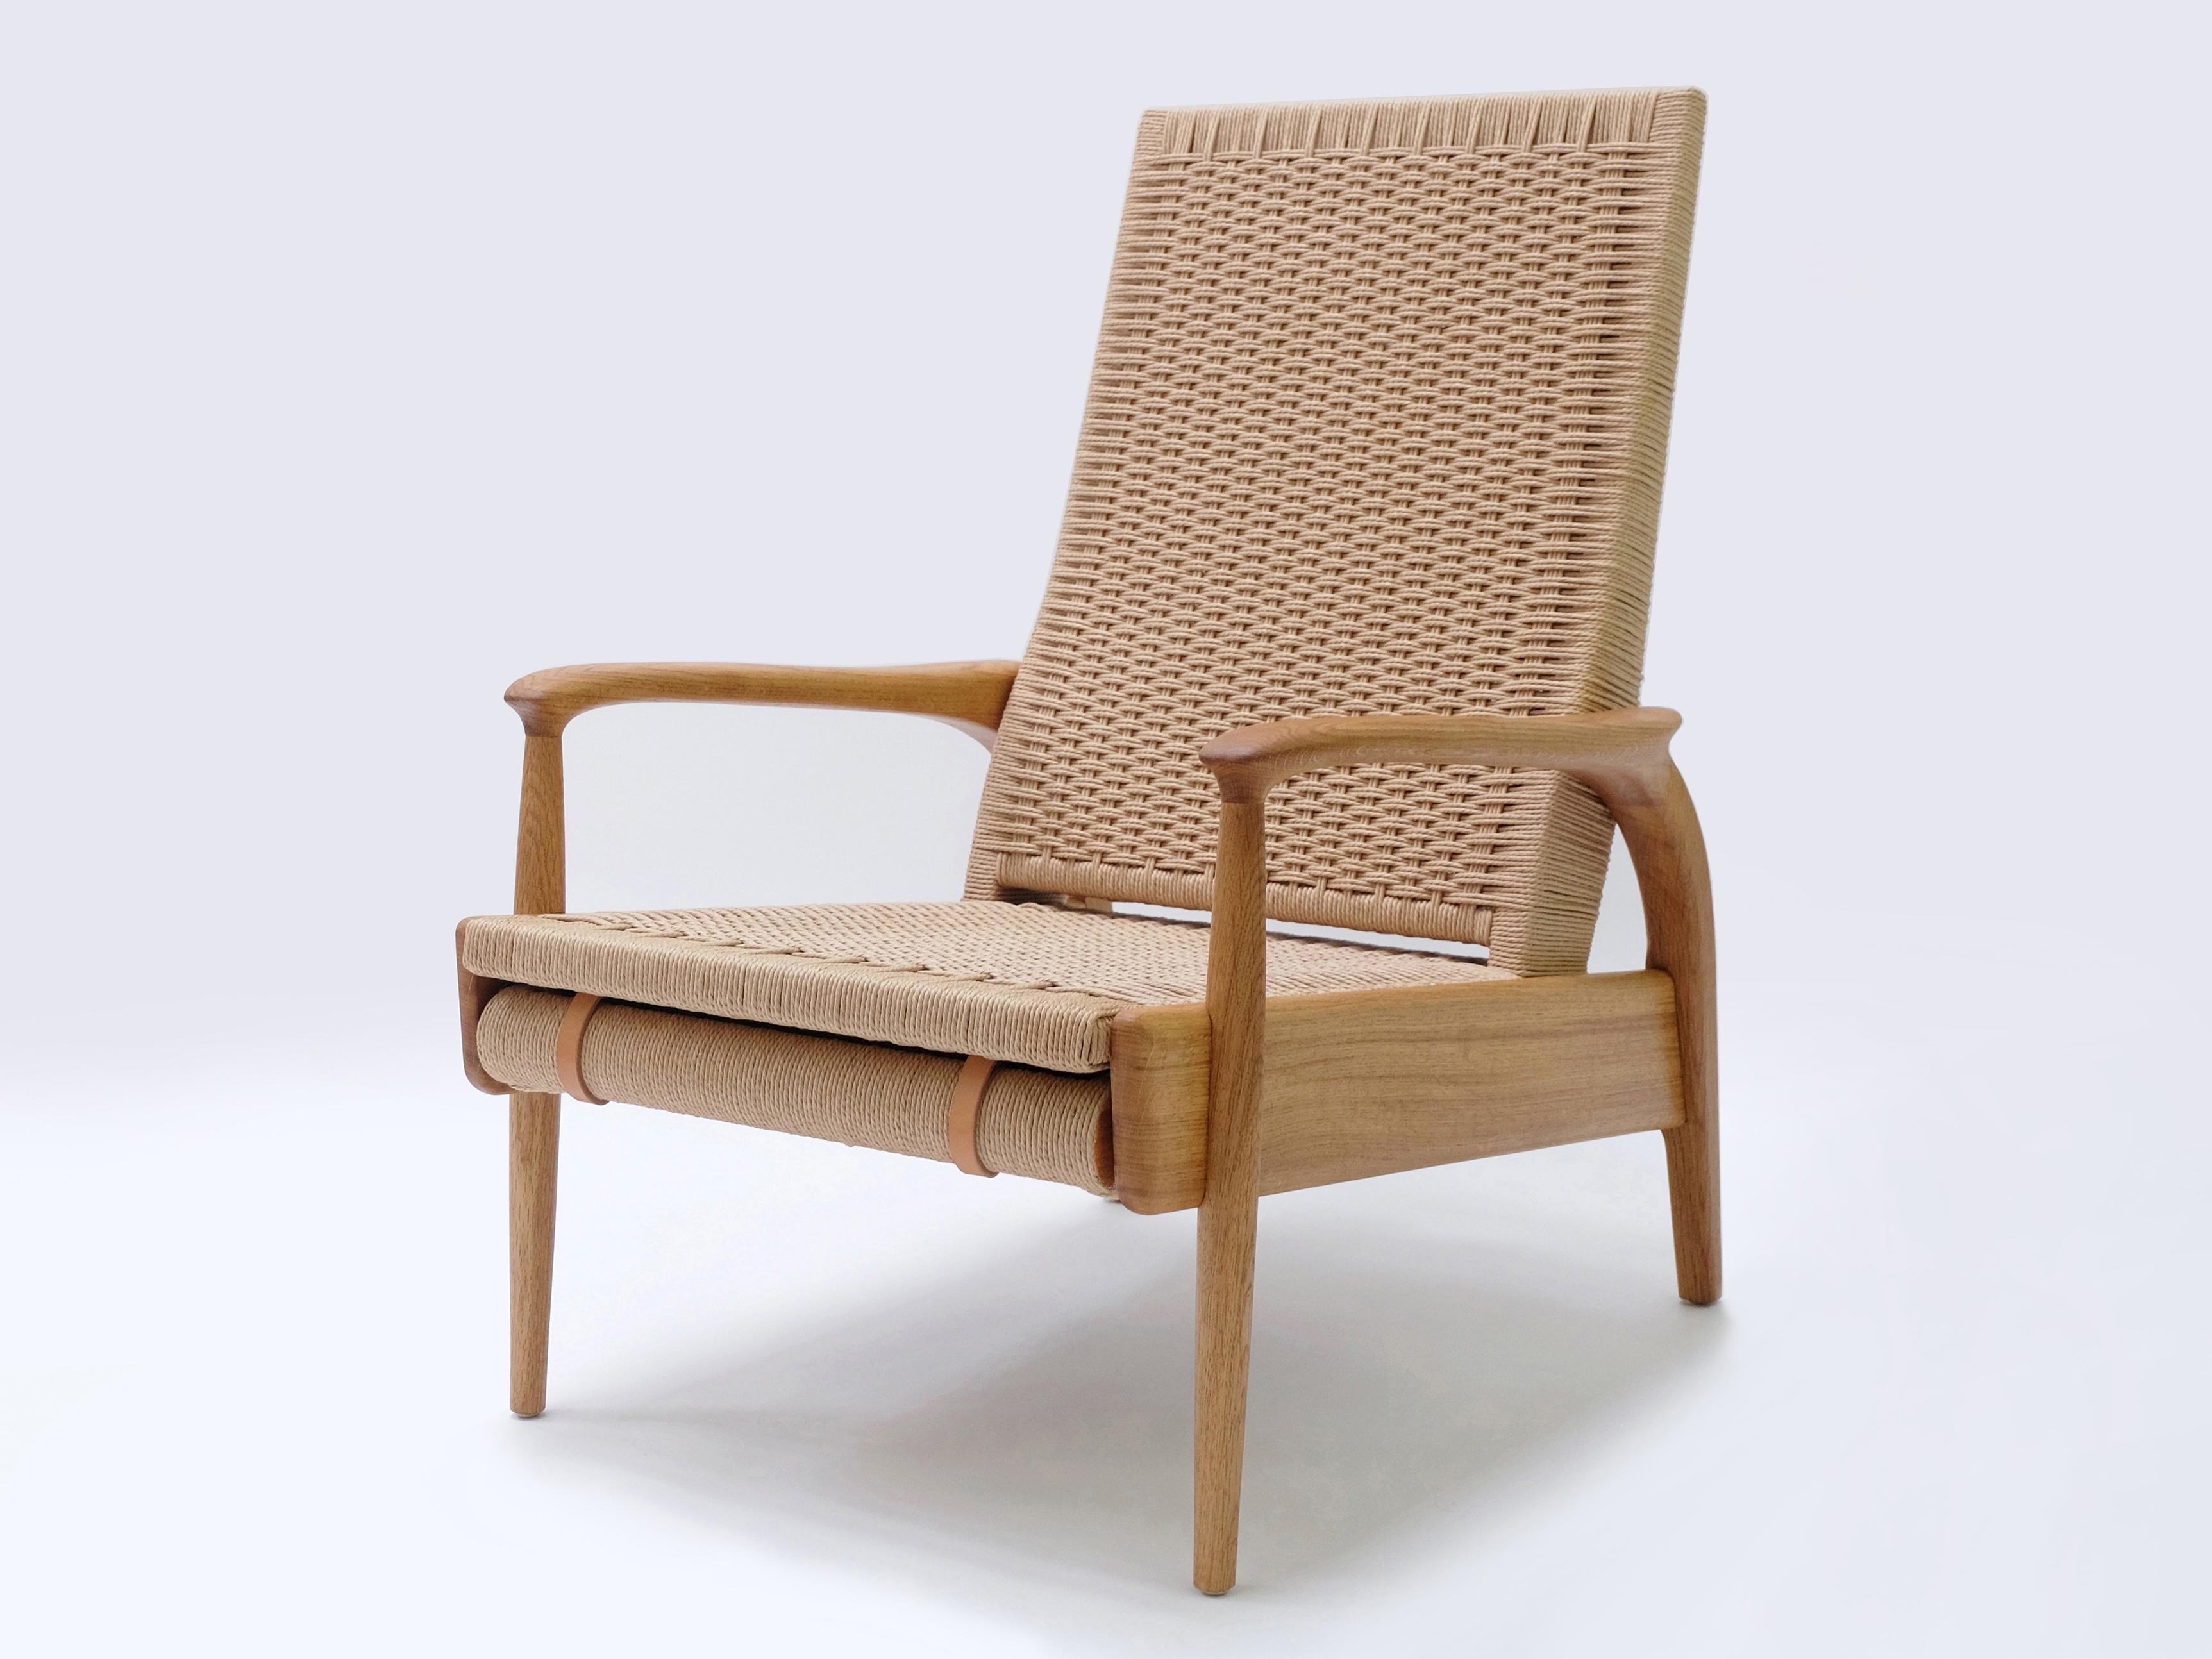 Custom-Made Handcrafted Reclining Eco Lounge Chair FENDRIK by Studio180degree
Shown in Sustainable Solid Natural Oiled Oak and Original Natural Danish Cord

Noble - Tactile – Refined - Sustainable
Reclining Eco lounge chair FENDRIK is a noble Eco